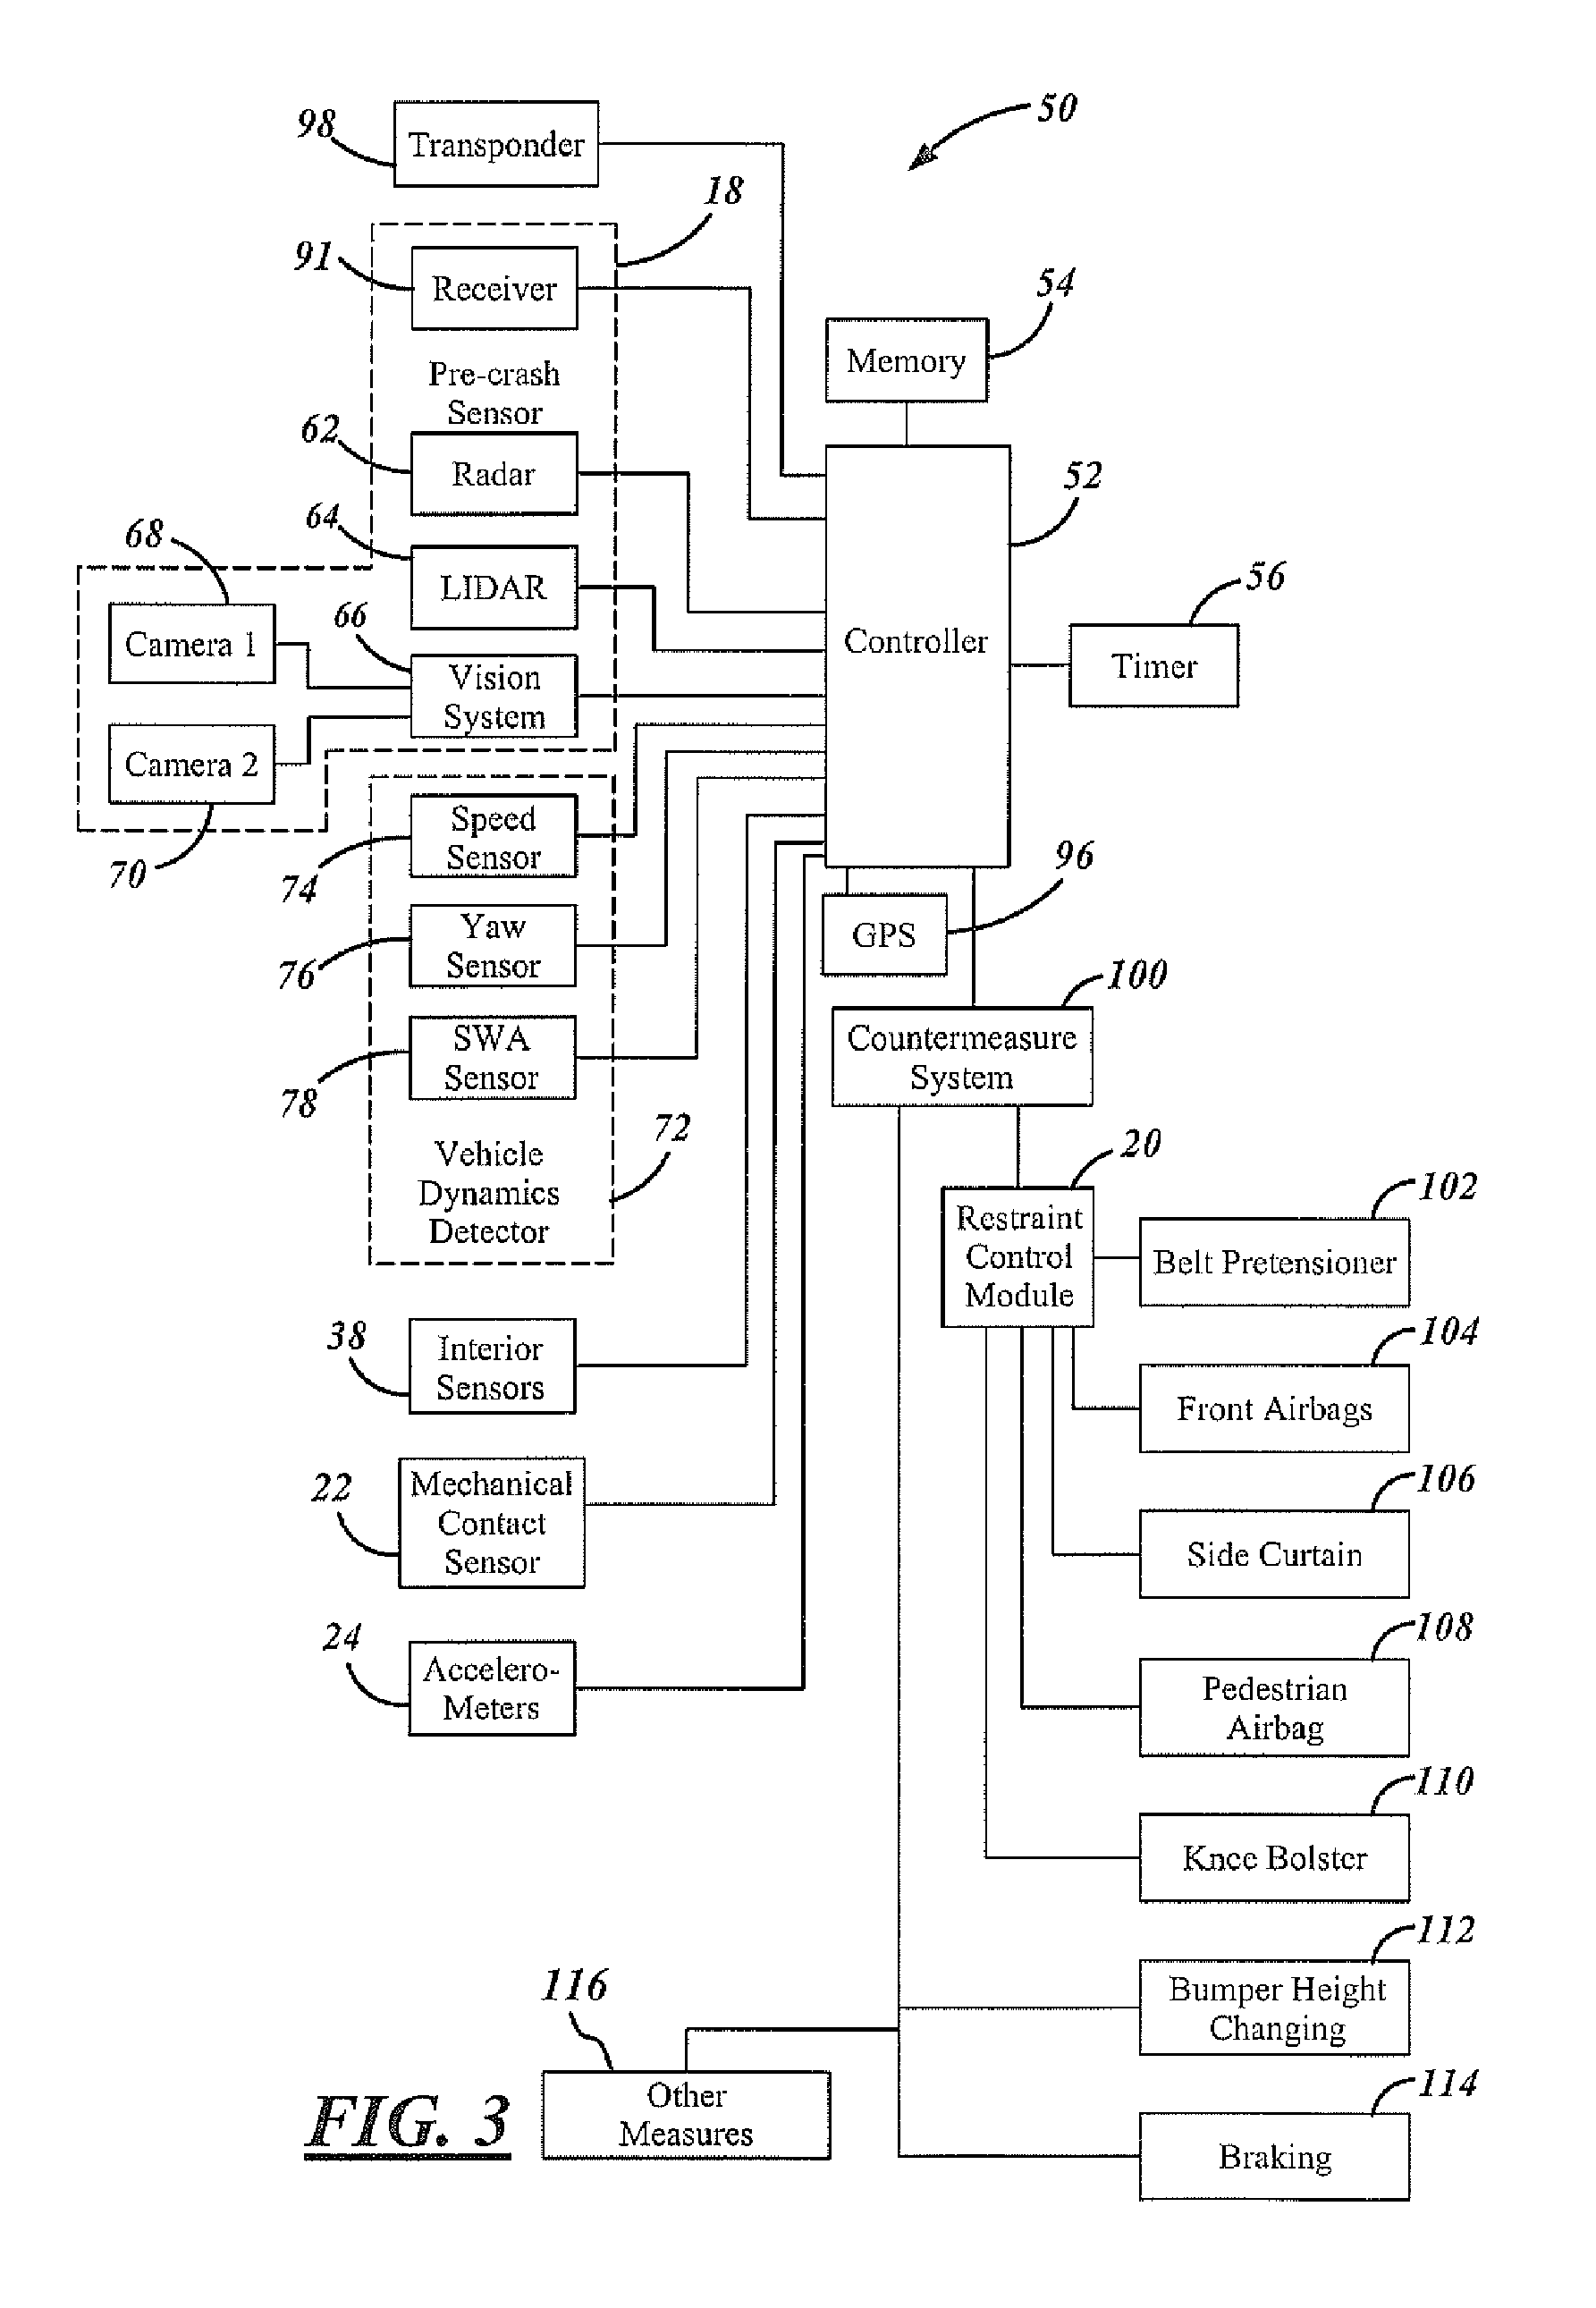 Method for operating a pre-crash sensing system with protruding contact sensor